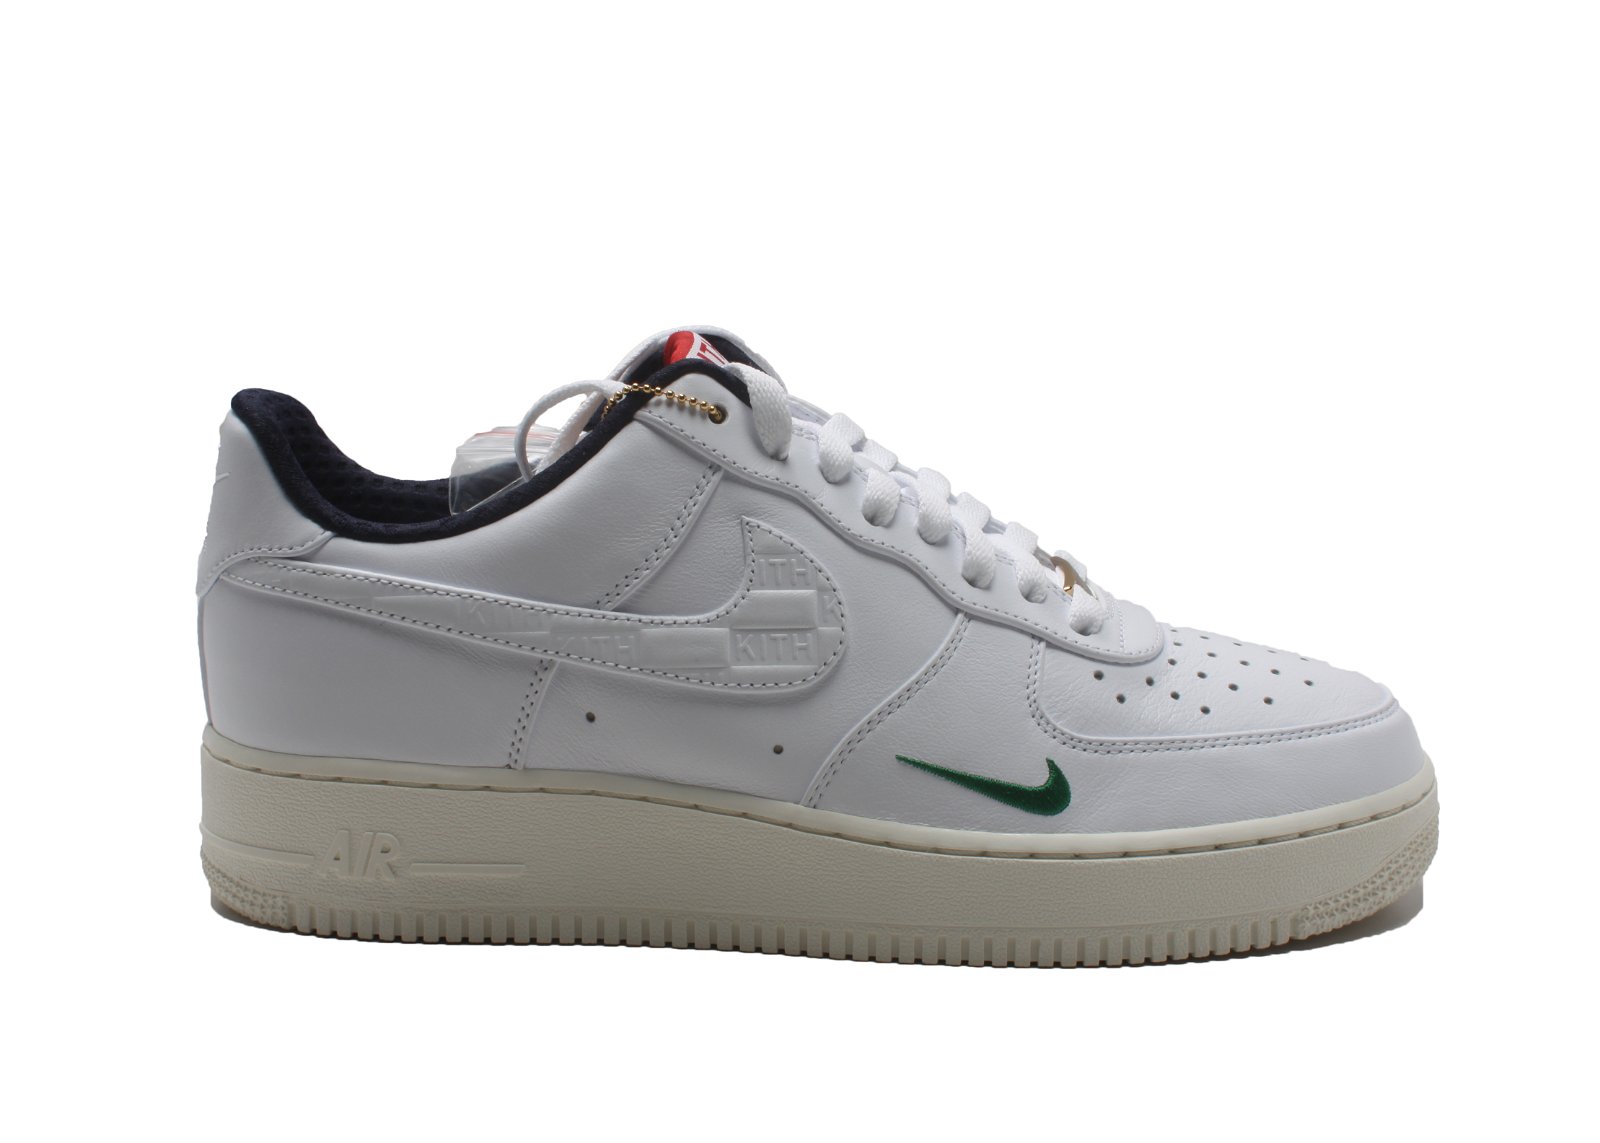 Nike Air Force 1 Low Kith sneaker informations